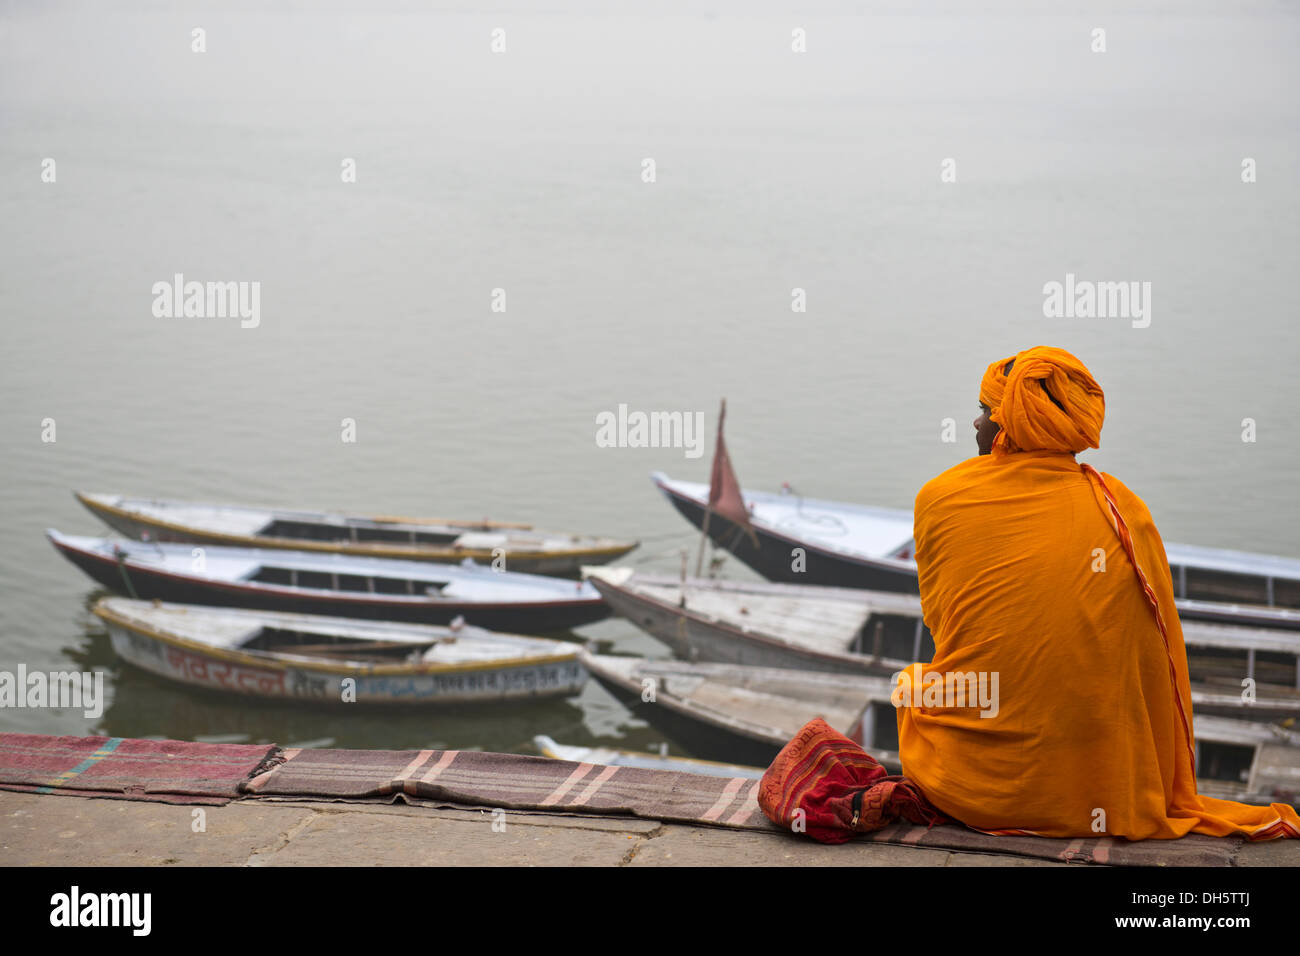 Brahmin or Hindu priest sitting on a blanket on the banks of the Ganges River with several boats tied to the shore, Varanasi Stock Photo